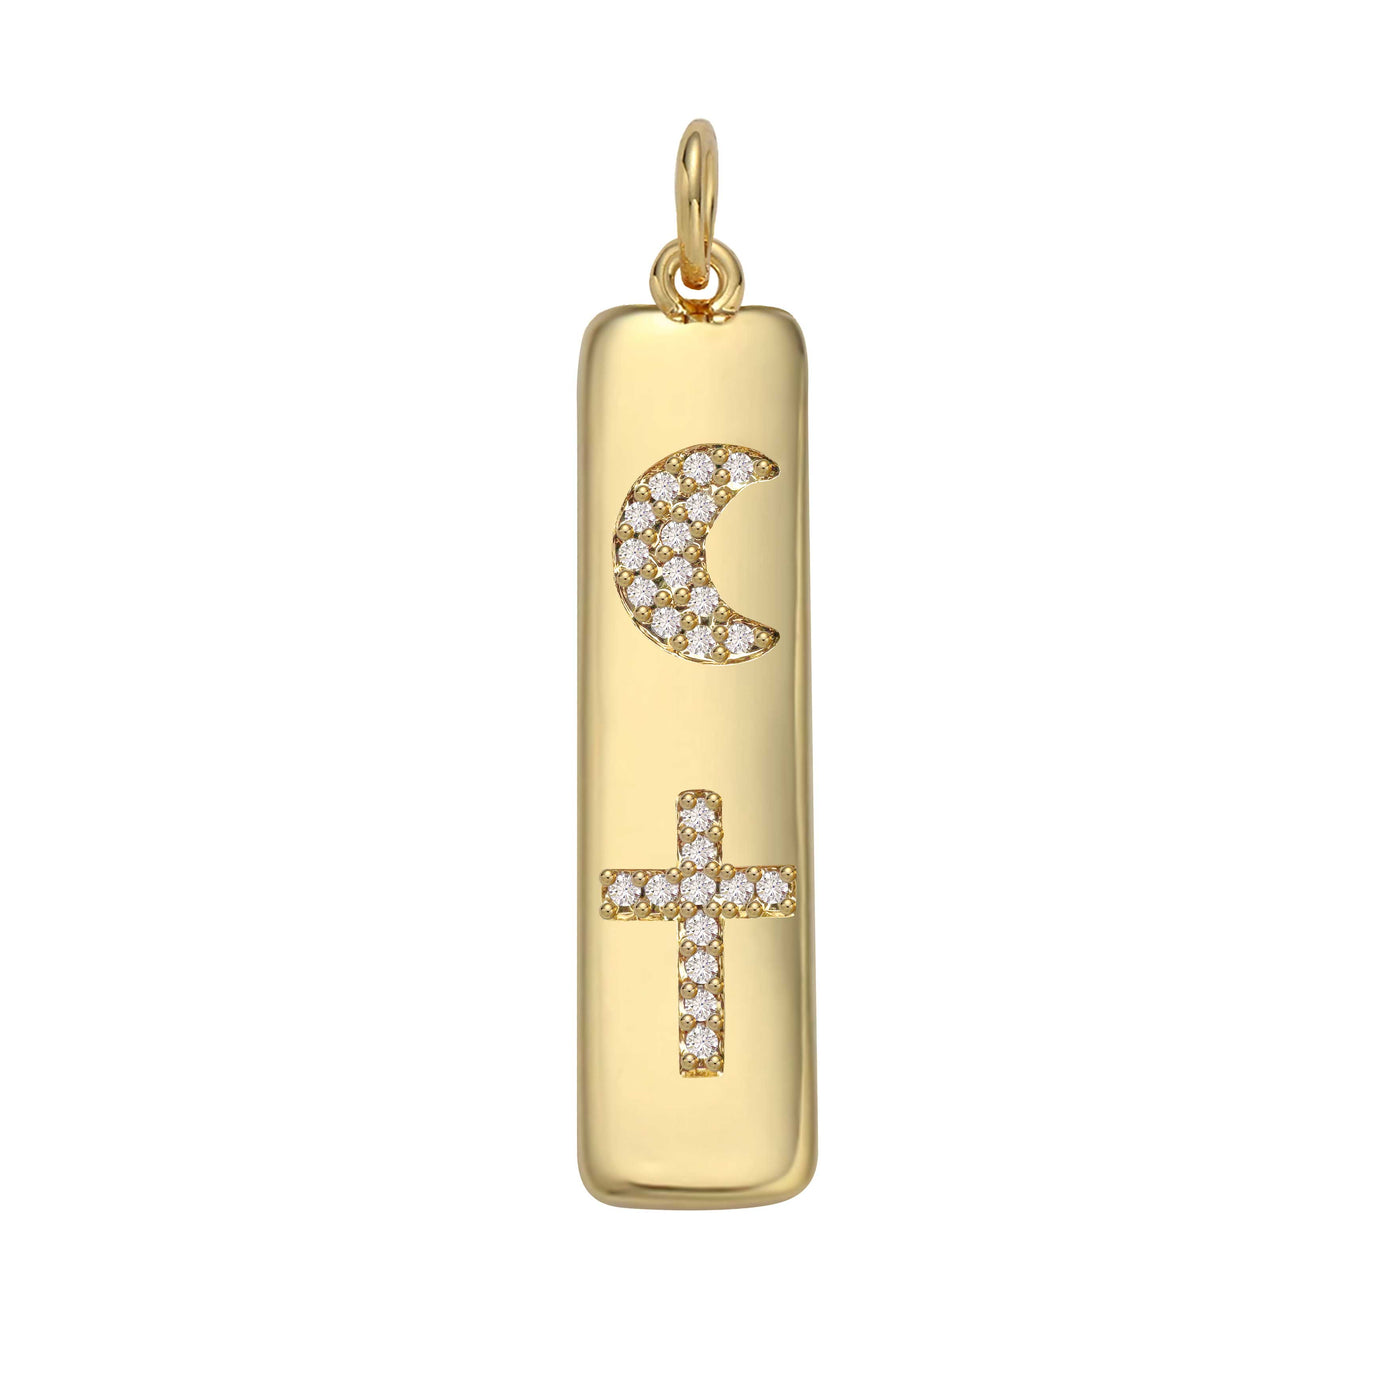 Cross and Crescent Moon Gold Charm Pendant